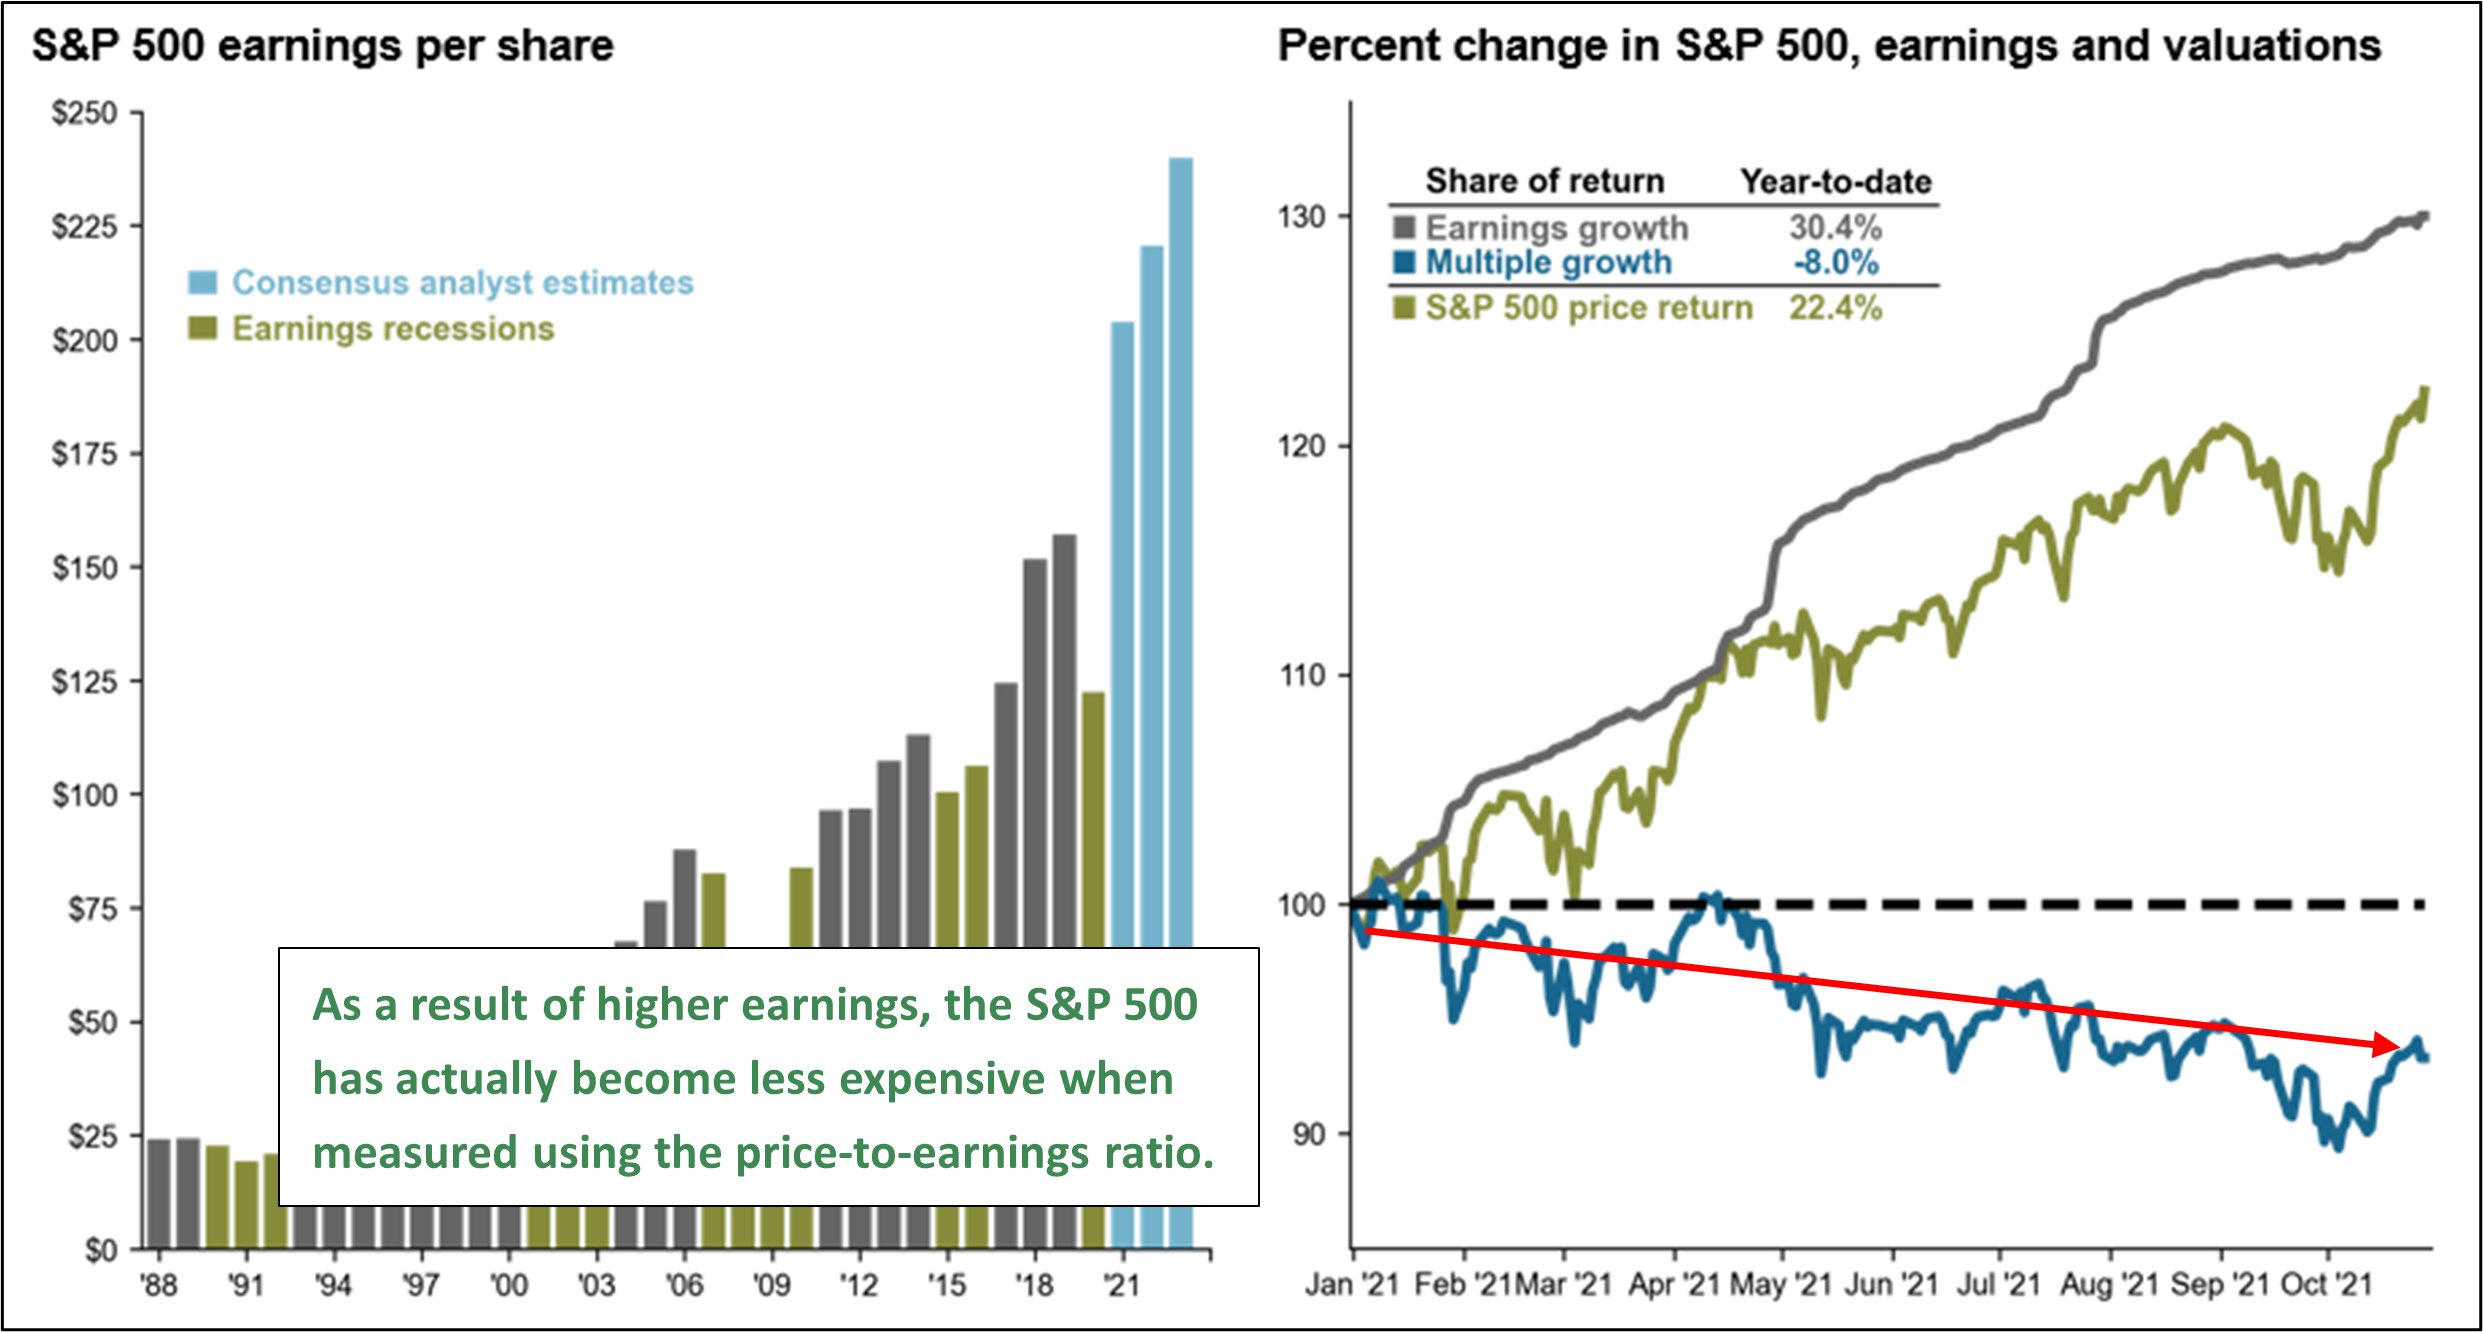 Bar chart depicting S&P 500 earnings per share and line graph depicting Percent change in S&P 500, earnings and valuations with text that reads: As a result of higher earnings, the S&P 500 has actually become less expensive when measured using the price-to-earnings ratio.